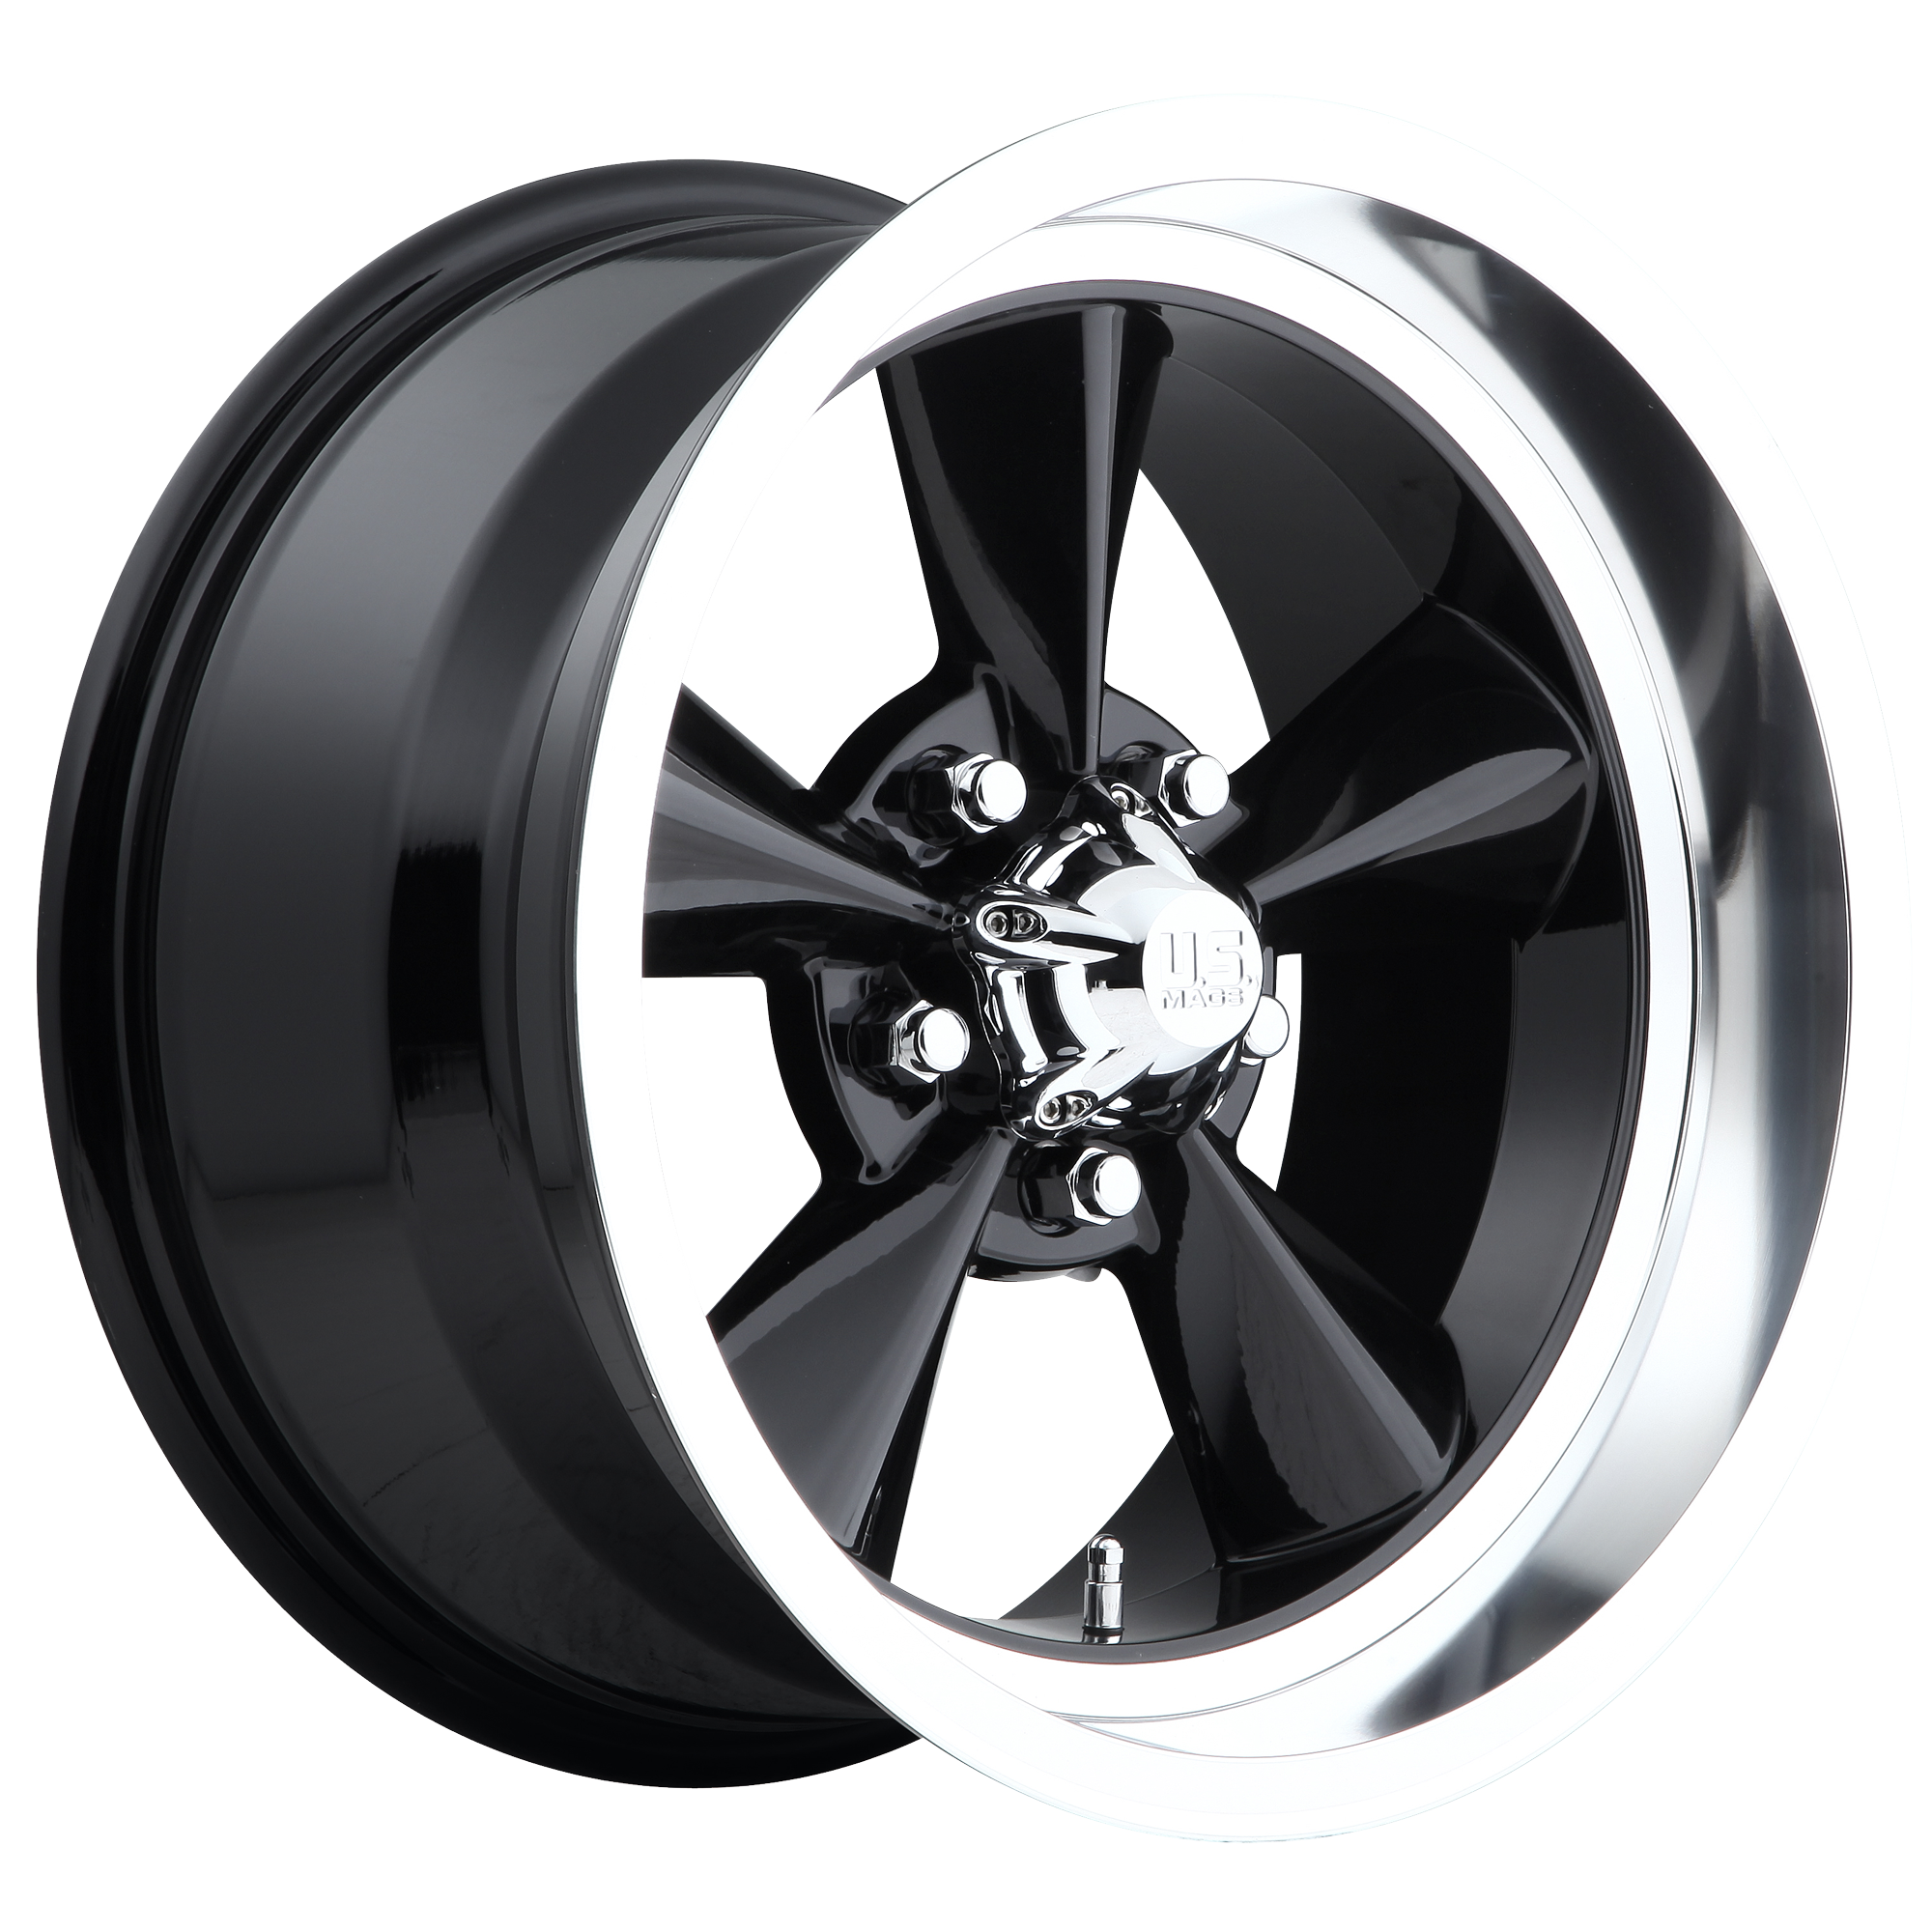 STANDARD 15x7 5x120.65 GLOSS BLACK (-5 mm) - Tires and Engine Performance